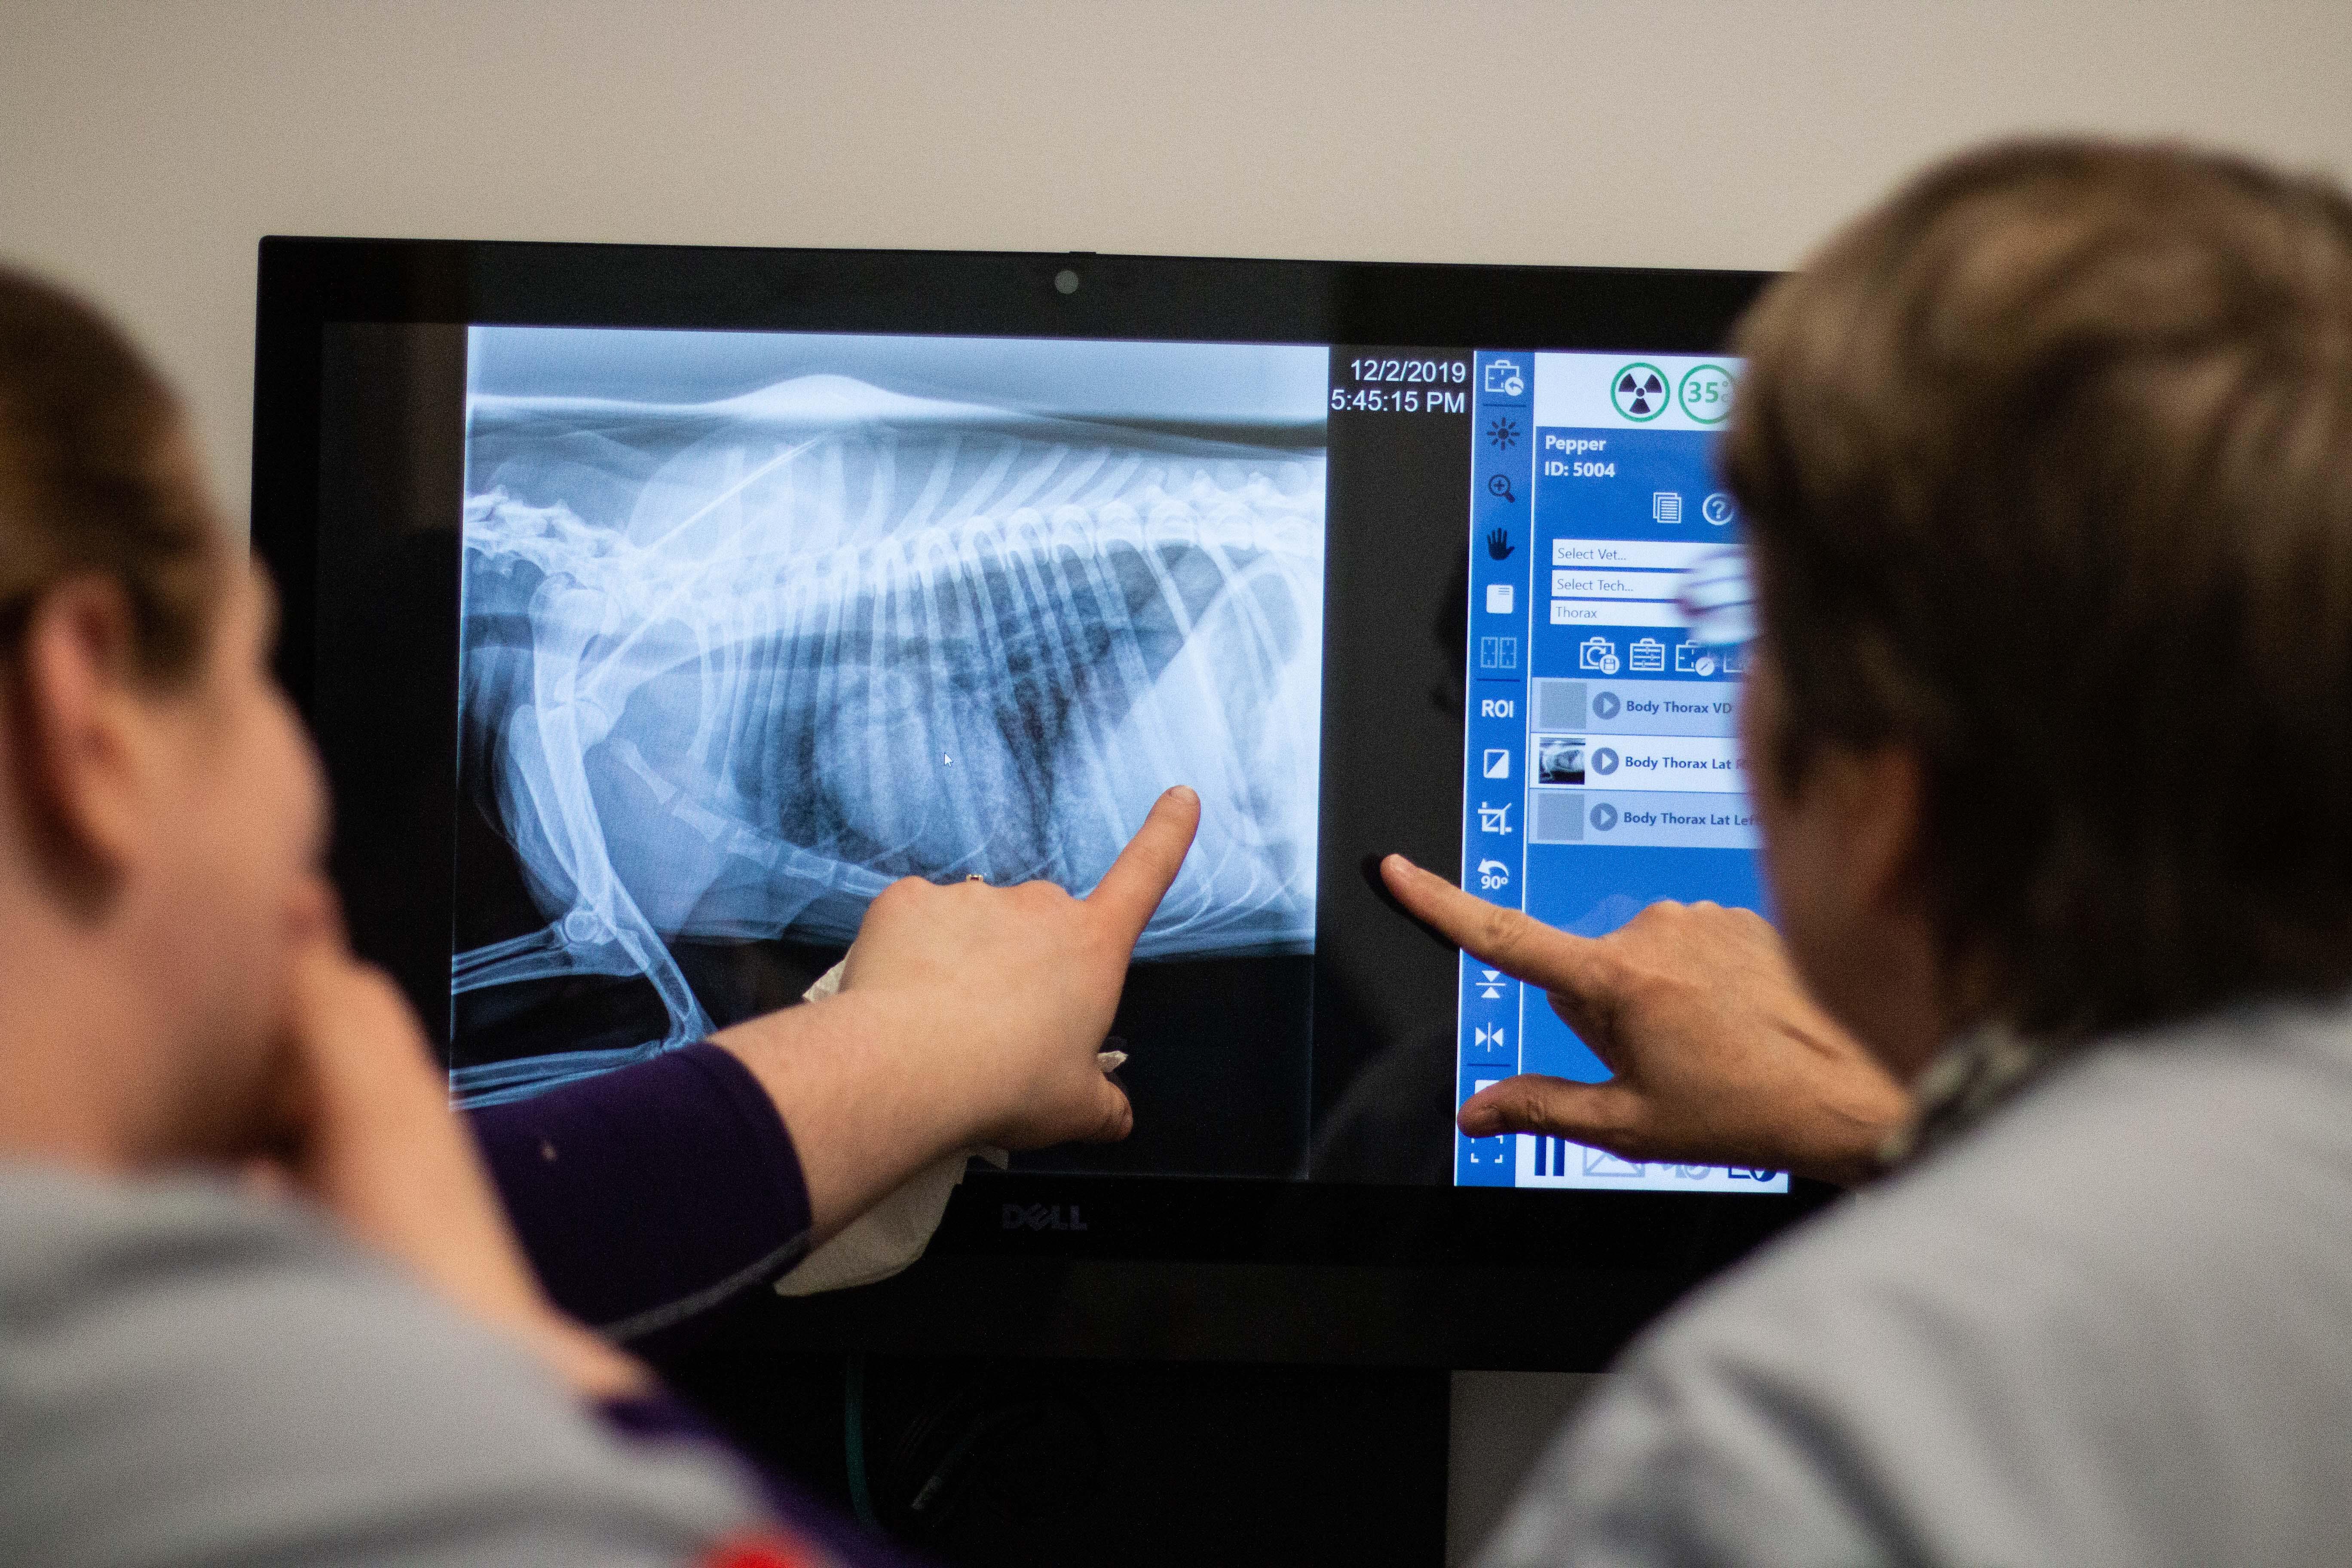 We offer on-site radiology, and every single digital xray that we perform is read by a board-certified radiologist.